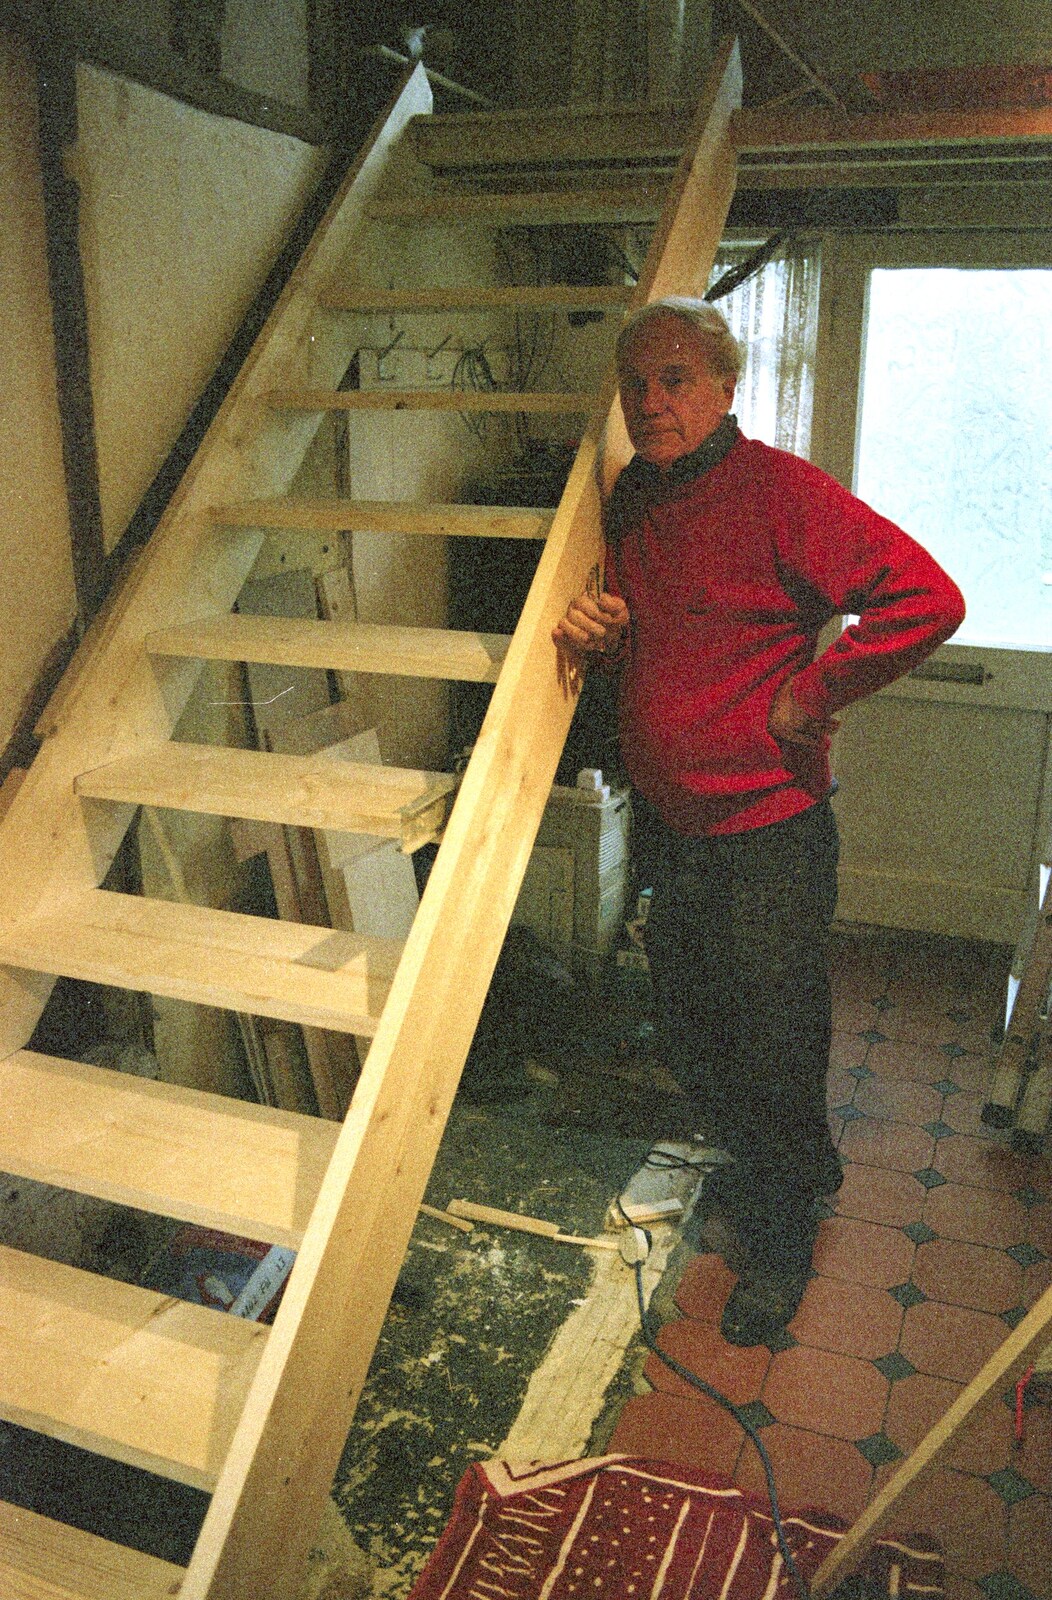 The Old Man stands next to our creation from 3G Lab, and Building a Staircase, Brome, Suffolk - 11th February 2001